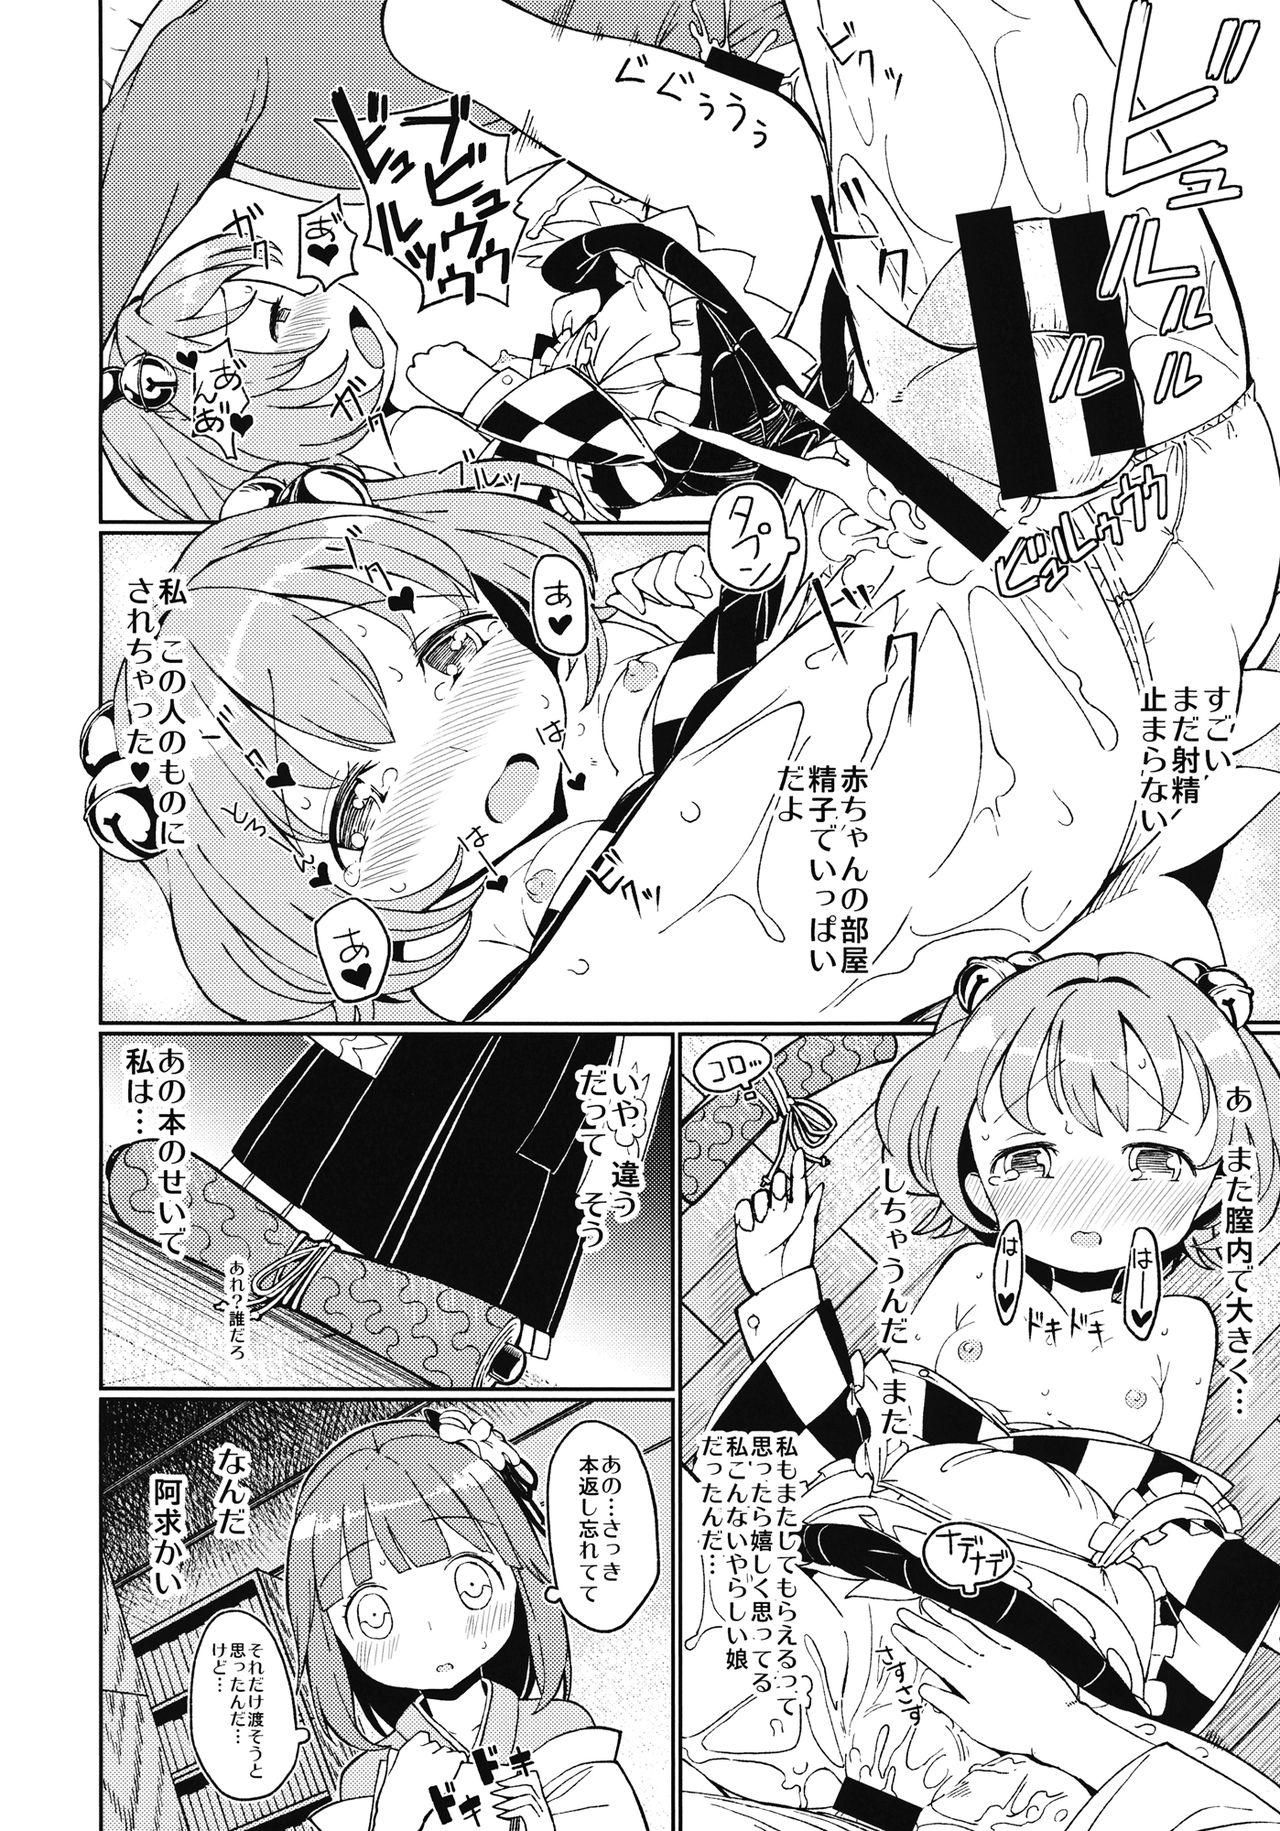 Bj Suzu na AnAn - Touhou project Uncensored - Page 9